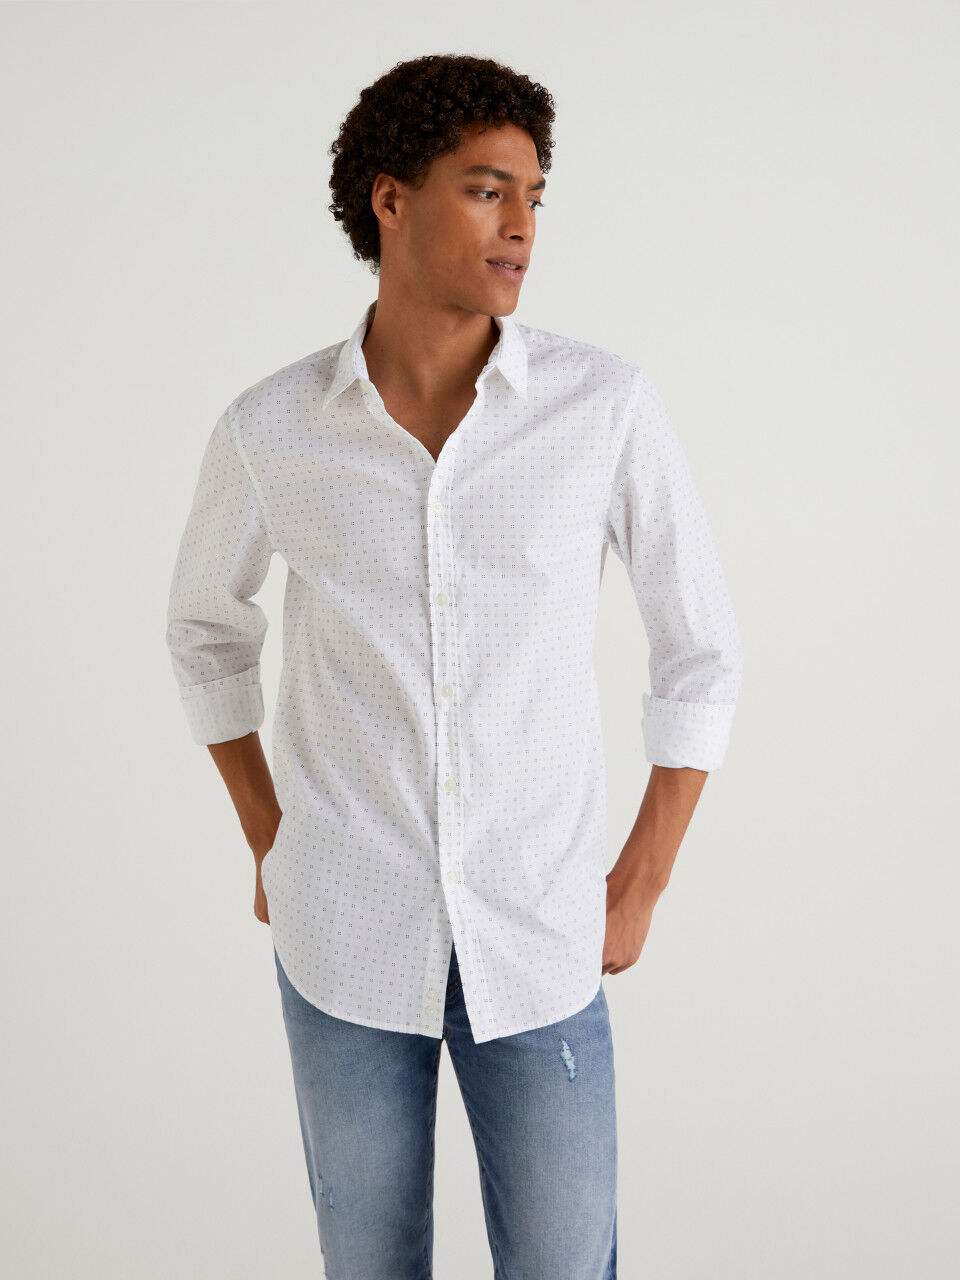 catch up pile cabin Men's Patterned Shirts New Collection 2023 | Benetton